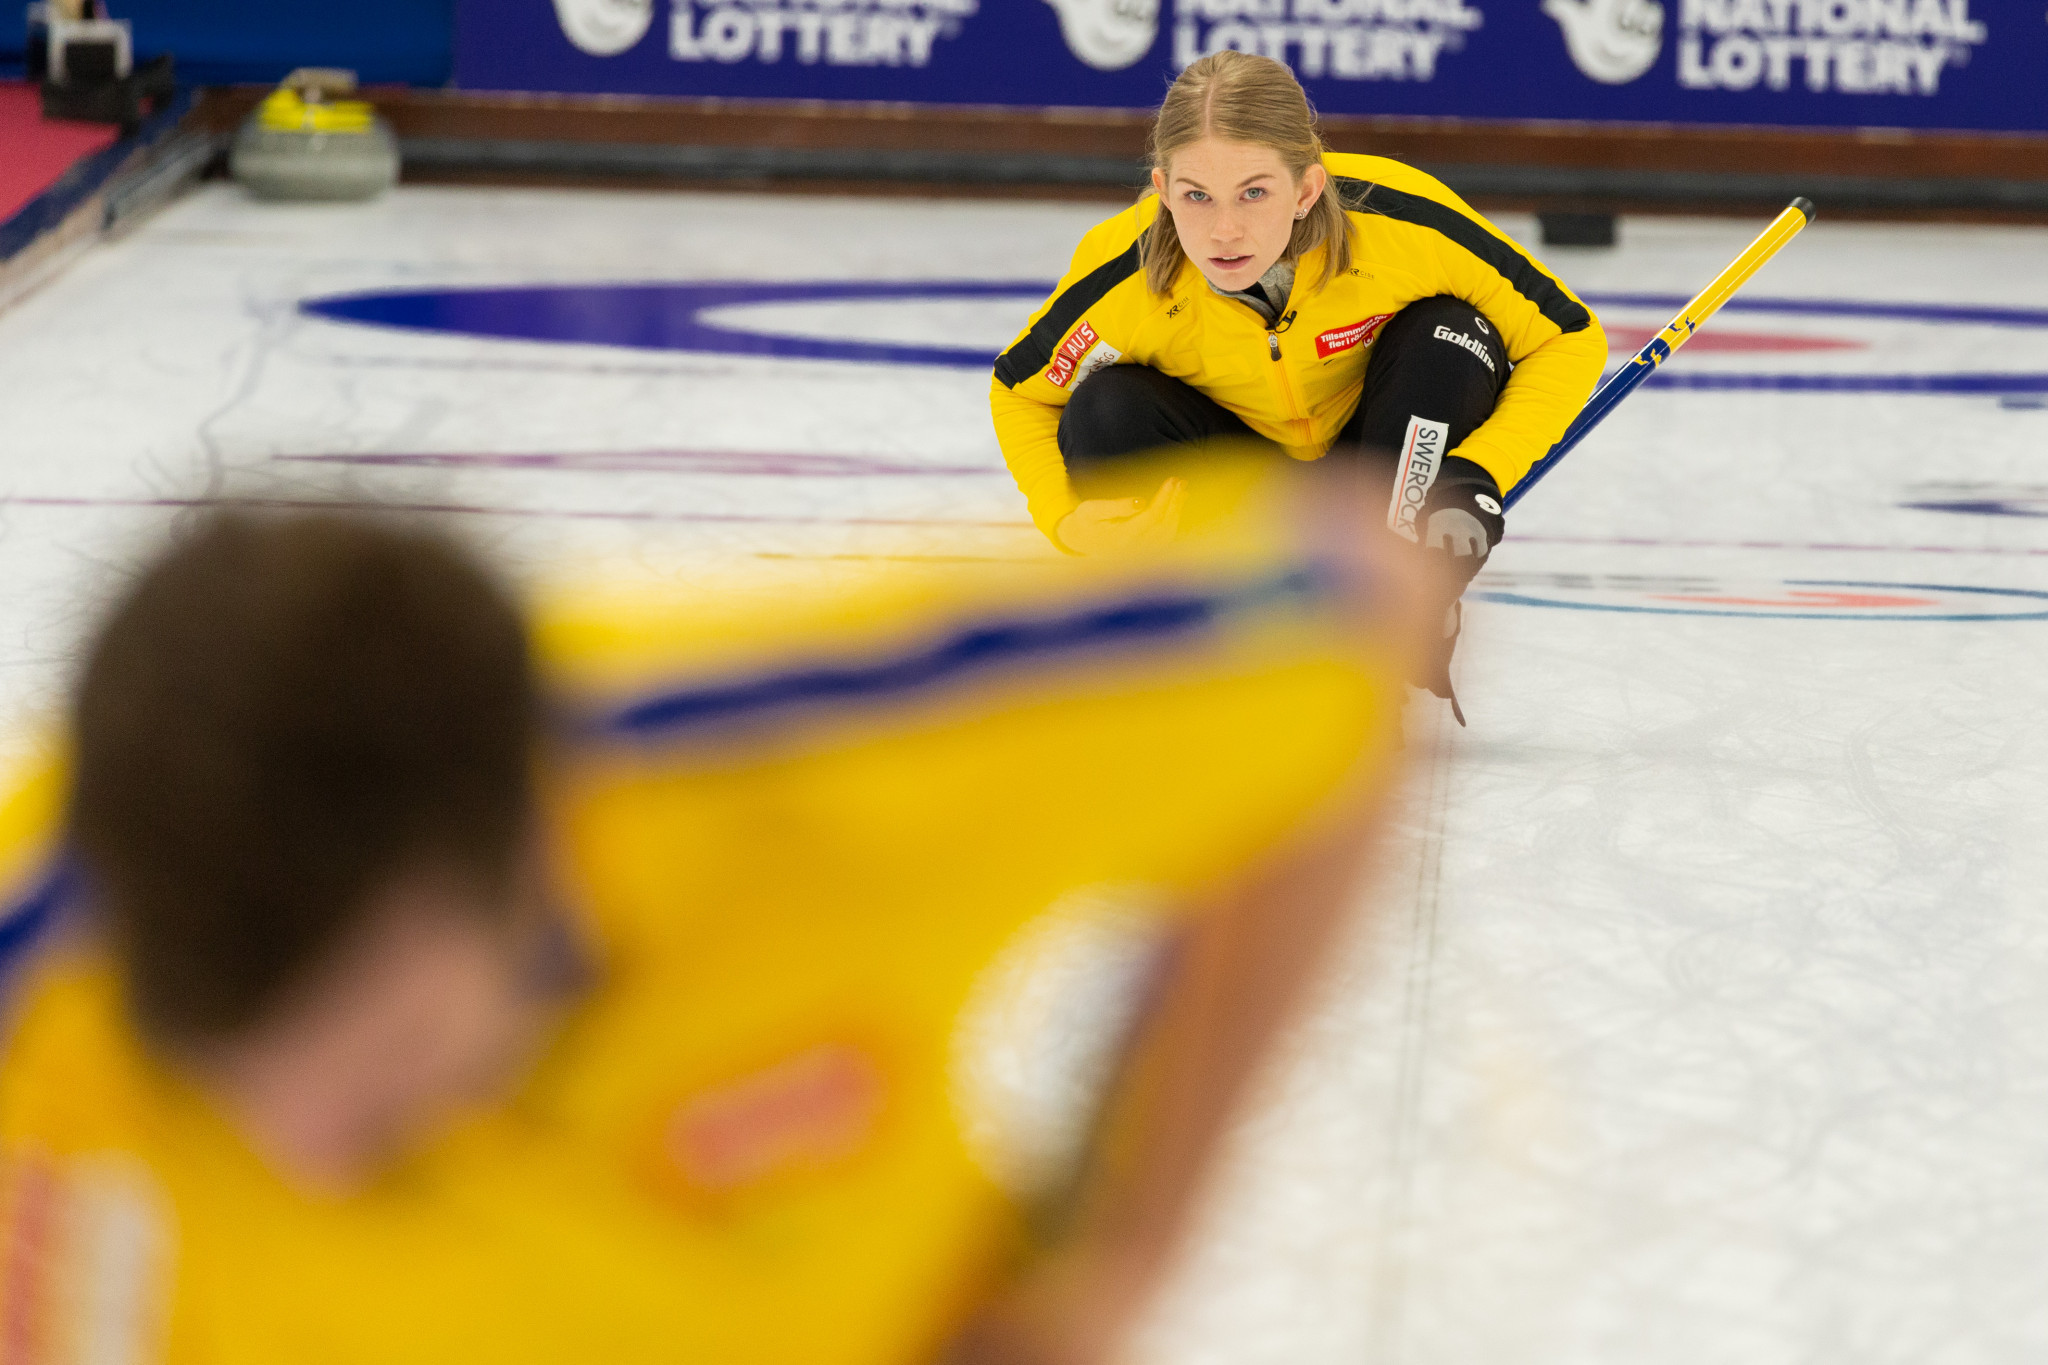 Almida de Val and Sweden opened with a win at the World Mixed Doubles Curling Championship ©WCF/Céline Stucki